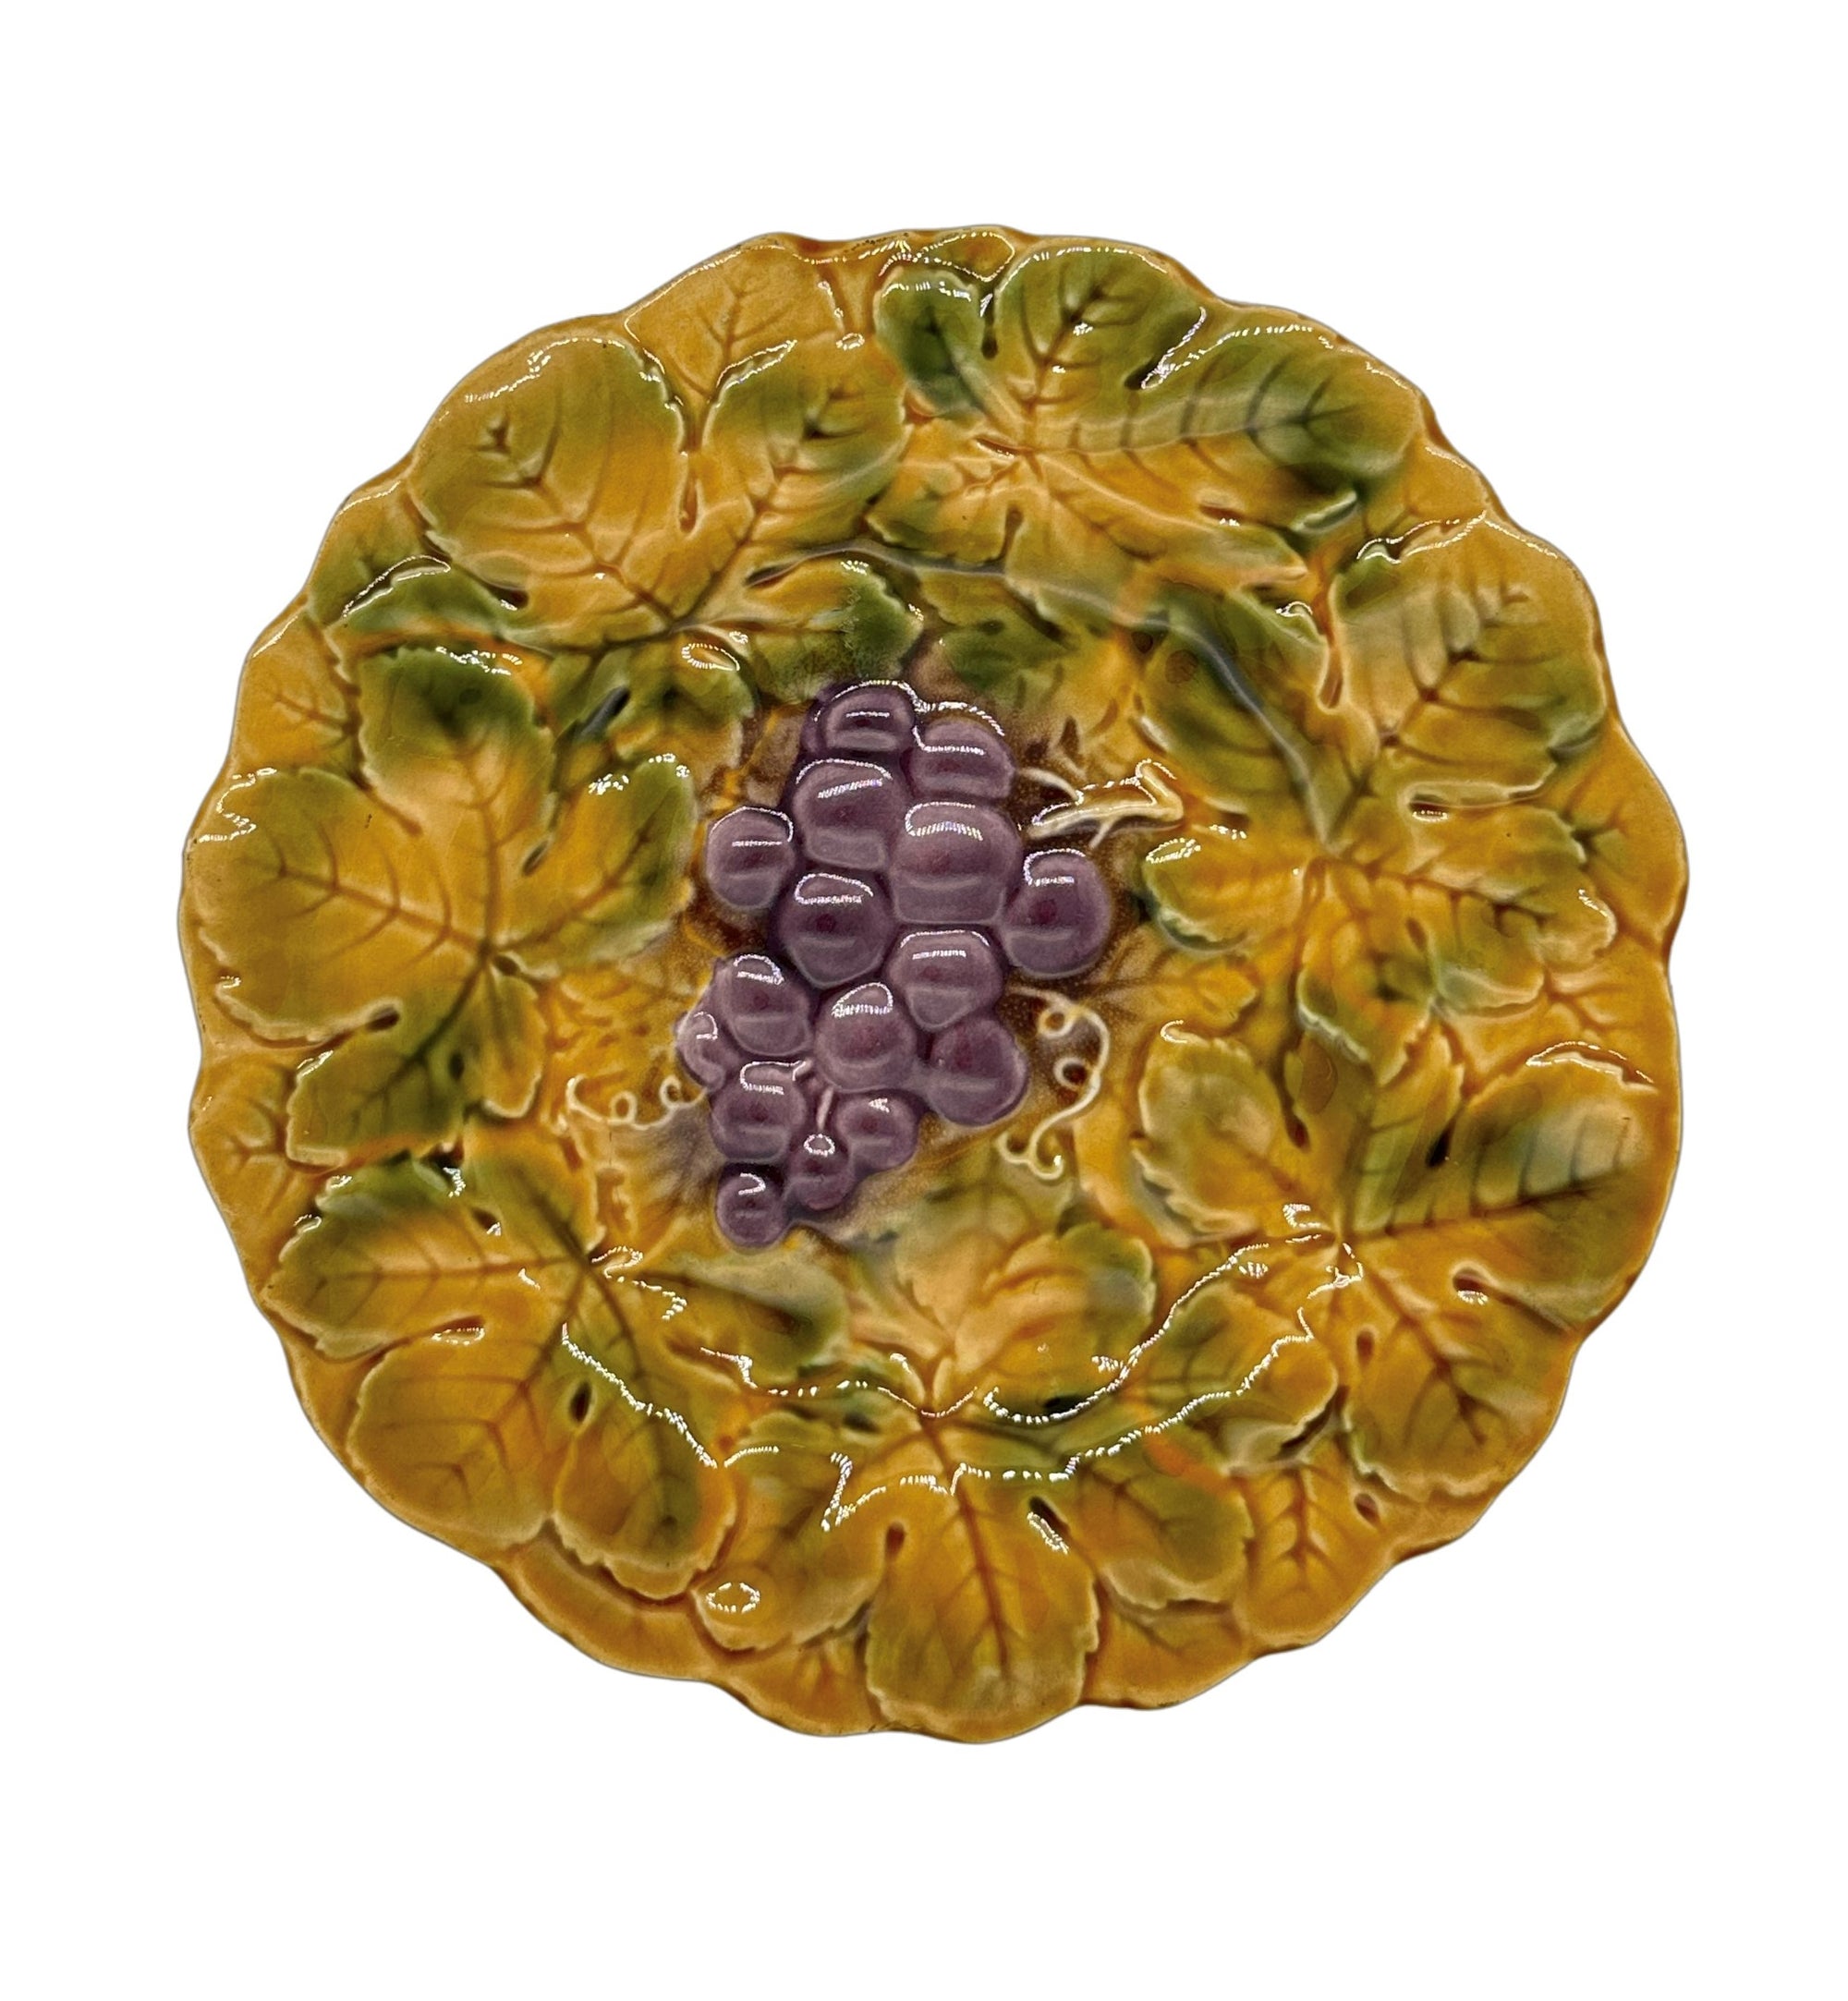 Vintage French Grapes in the Middle Majolica Plate